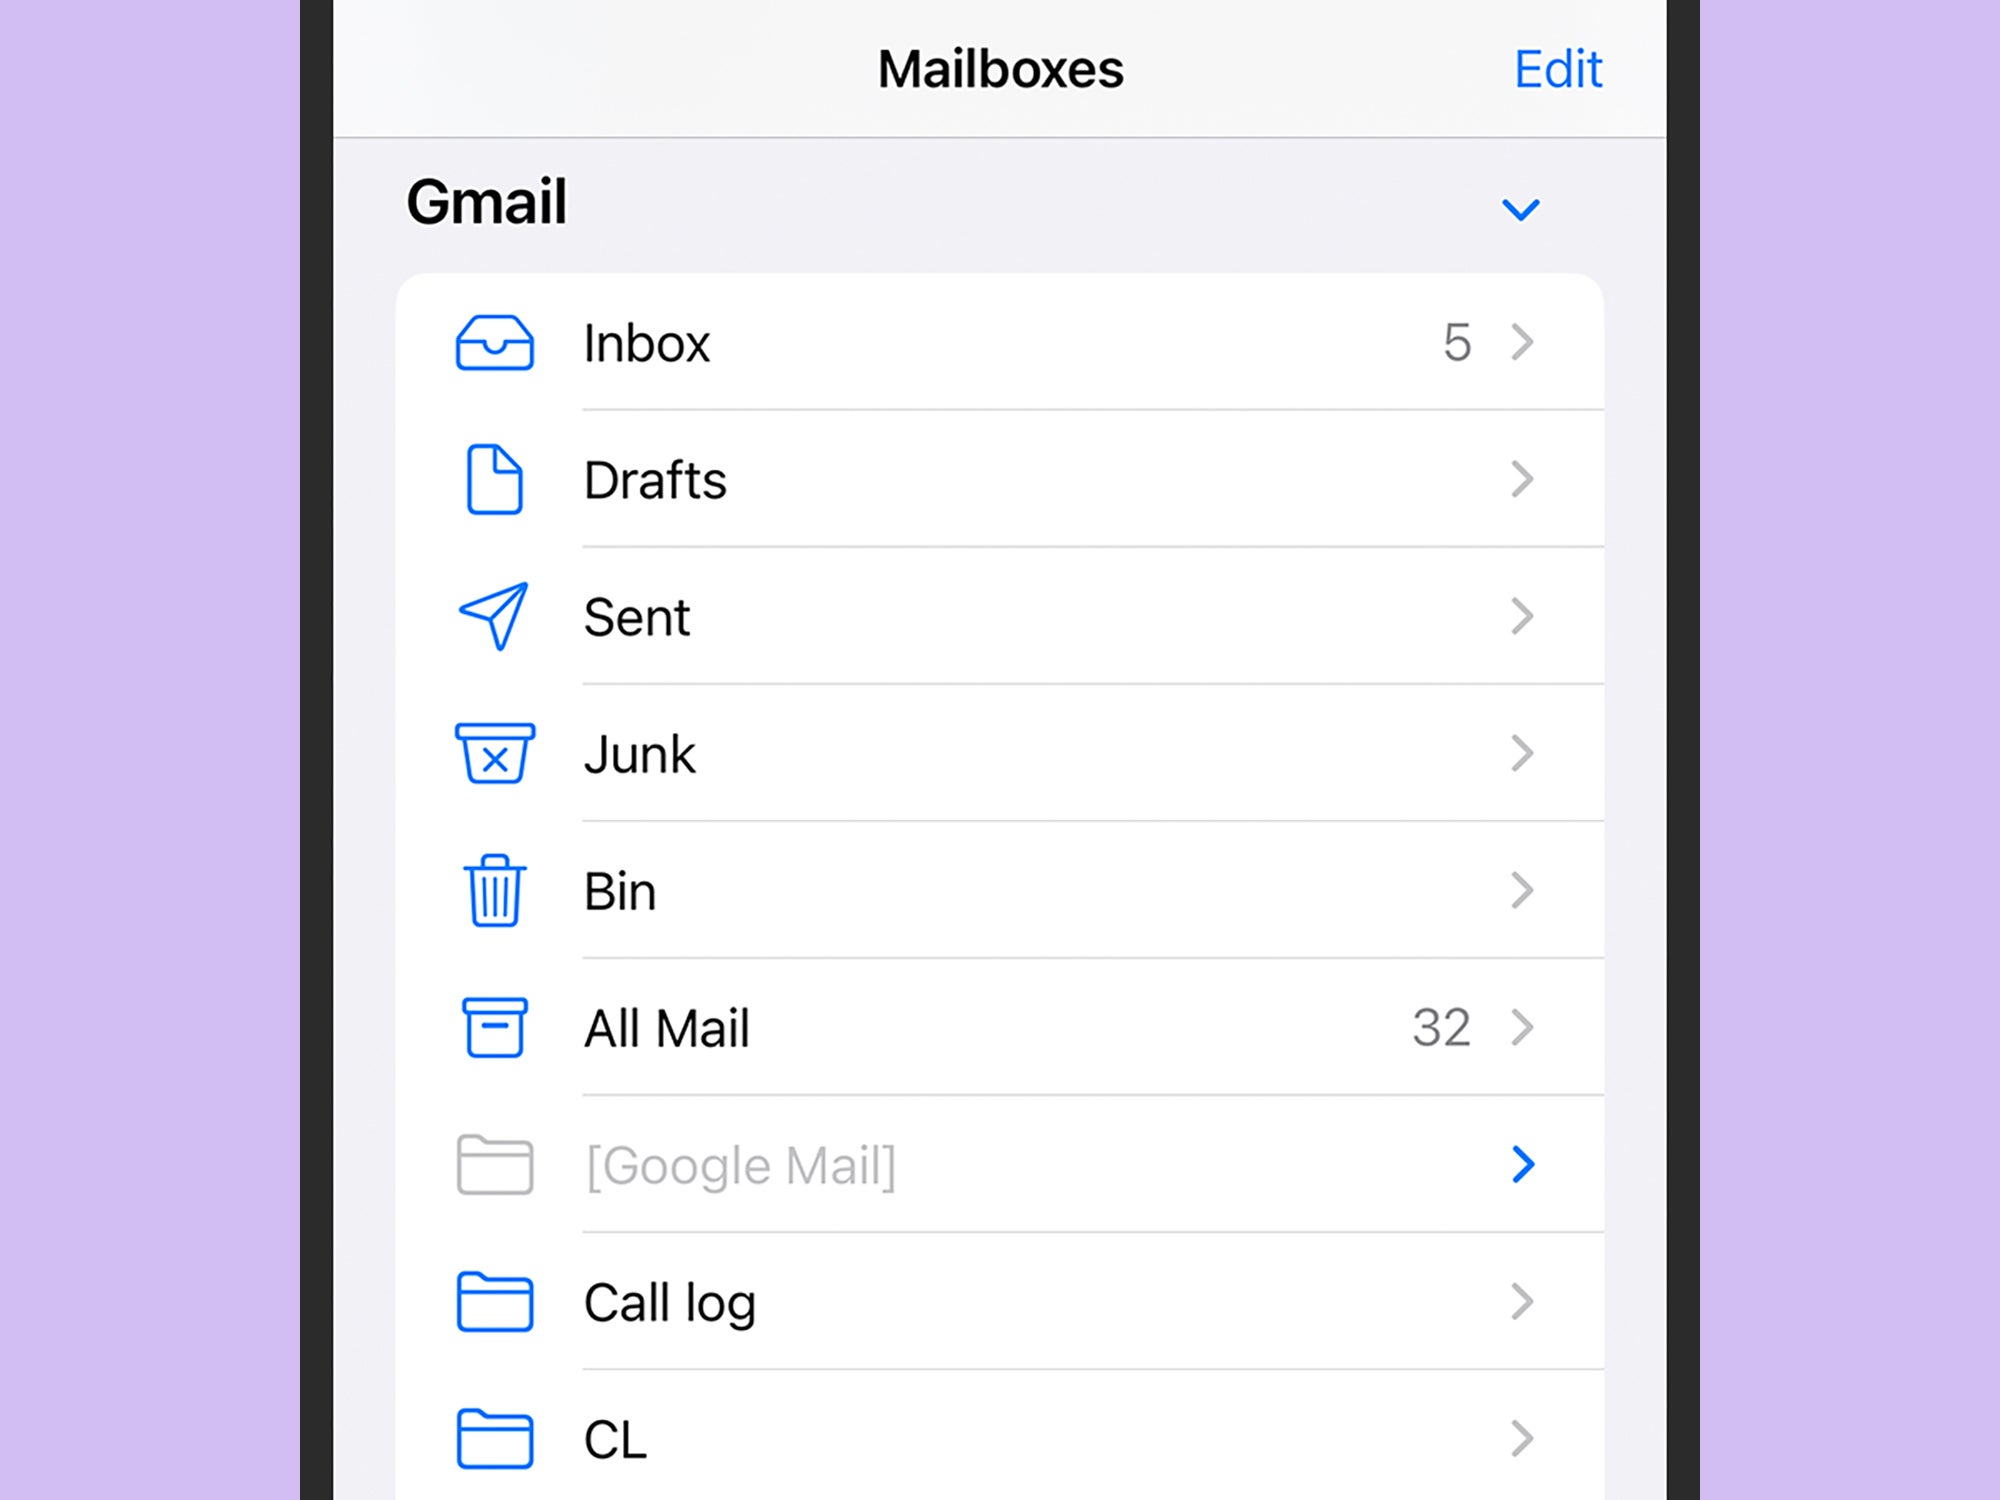 A Gmail mailbox in Apple's Mail app on an iPhone.